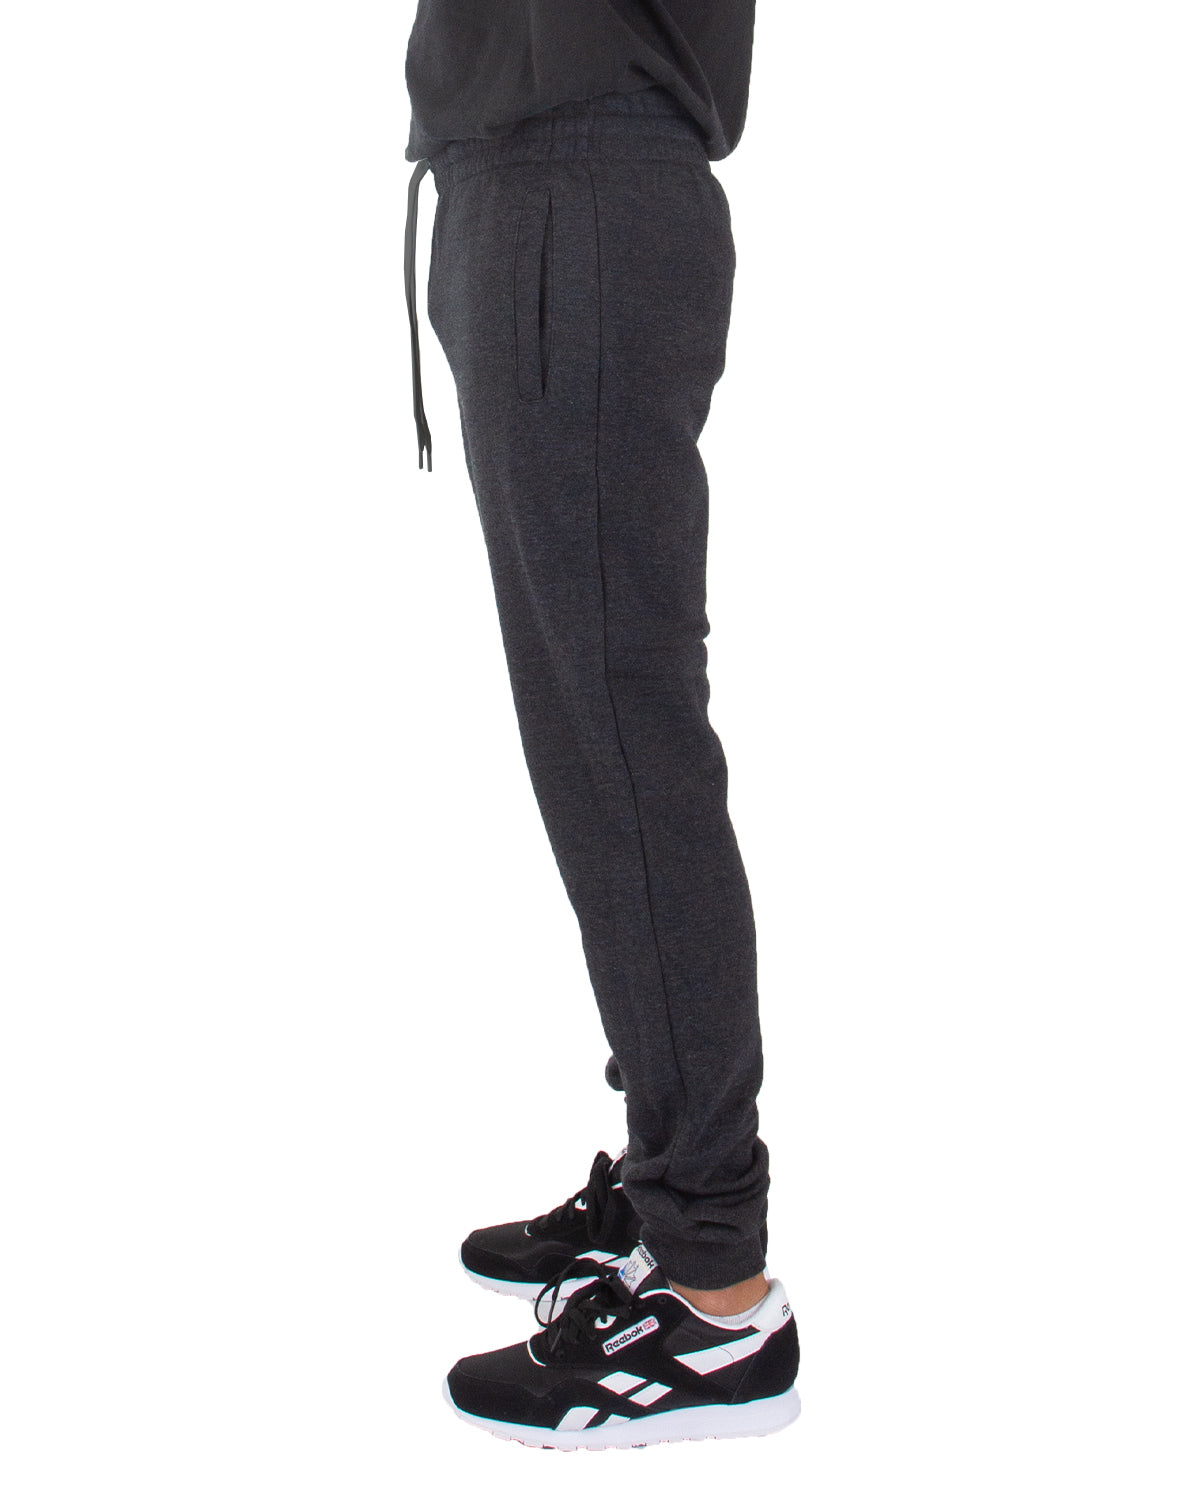 Unisex FLEECE 8 POCKET BAGGY TRACK PANT FOR MEN, Solid at Rs 899/piece in  Mumbai